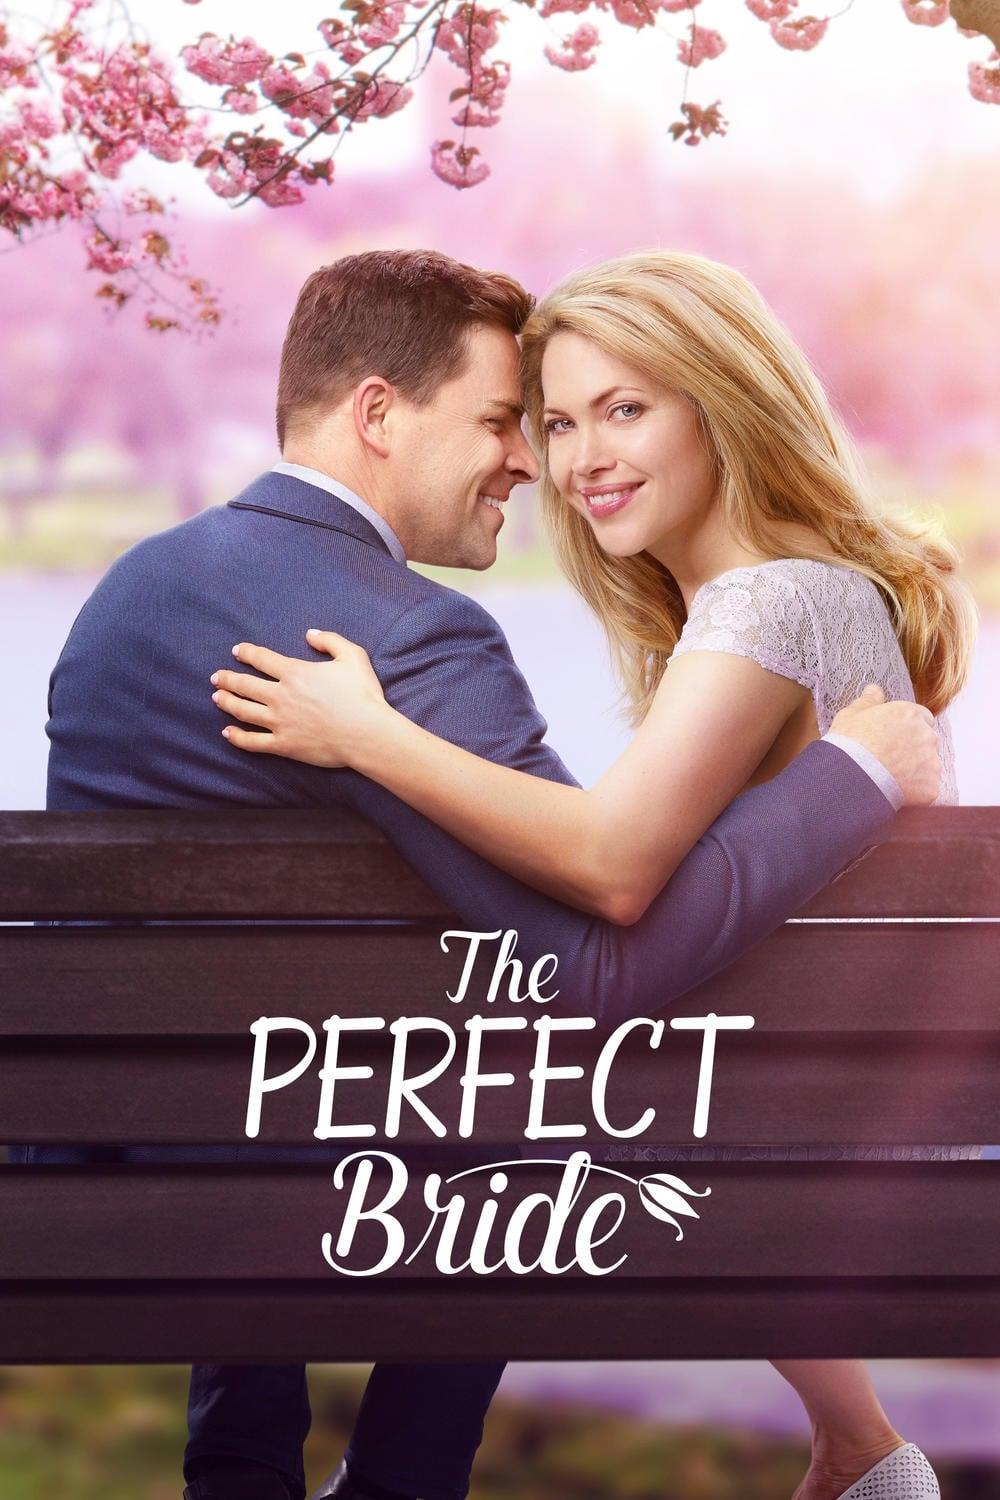 The Perfect Bride poster